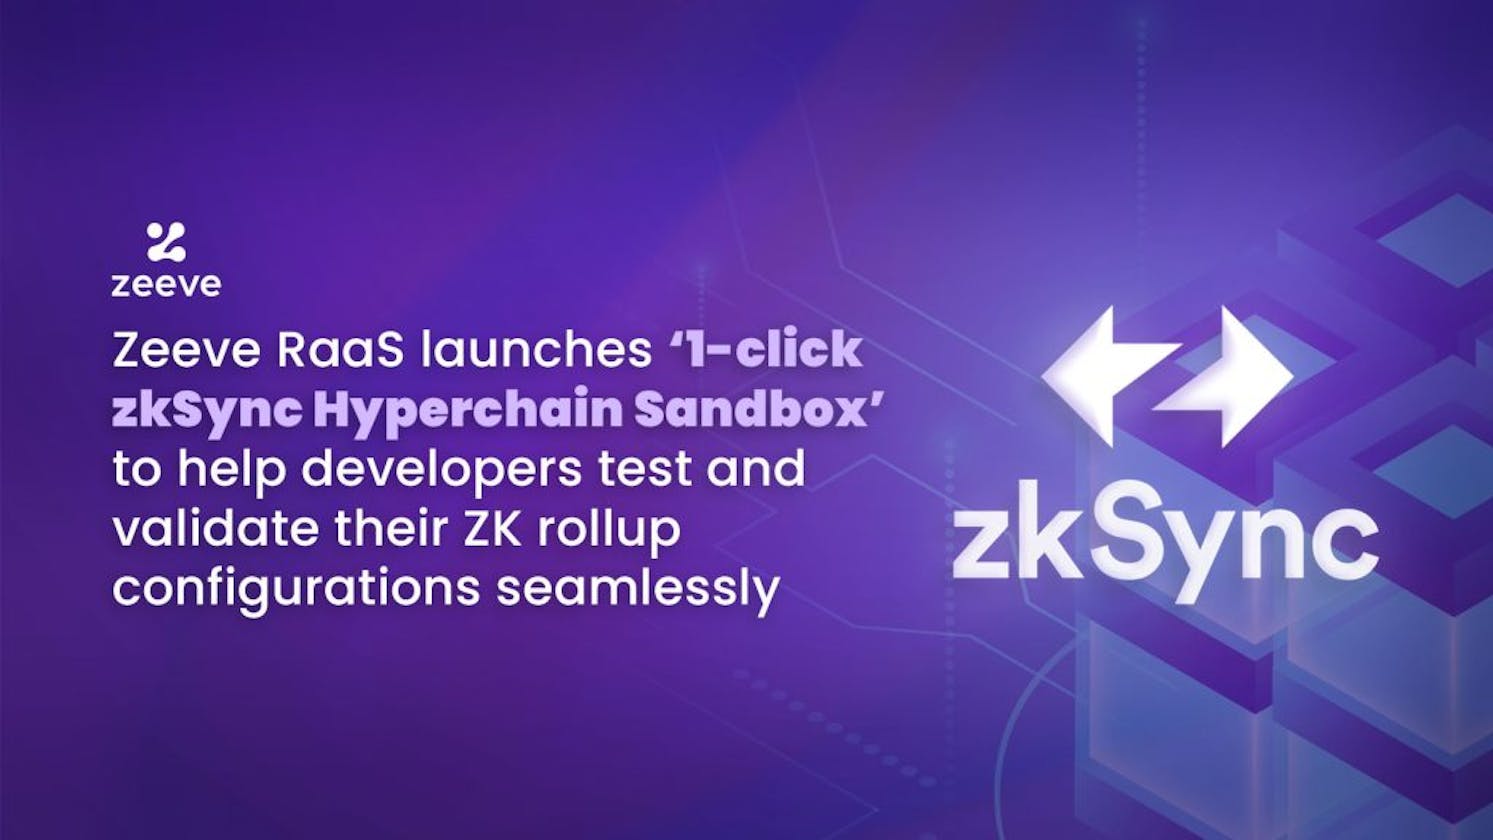 Zeeve RaaS launches ‘1-click zkSync Hyperchain Sandbox’ to help developers test and validate their ZK rollup configurations seamlessly